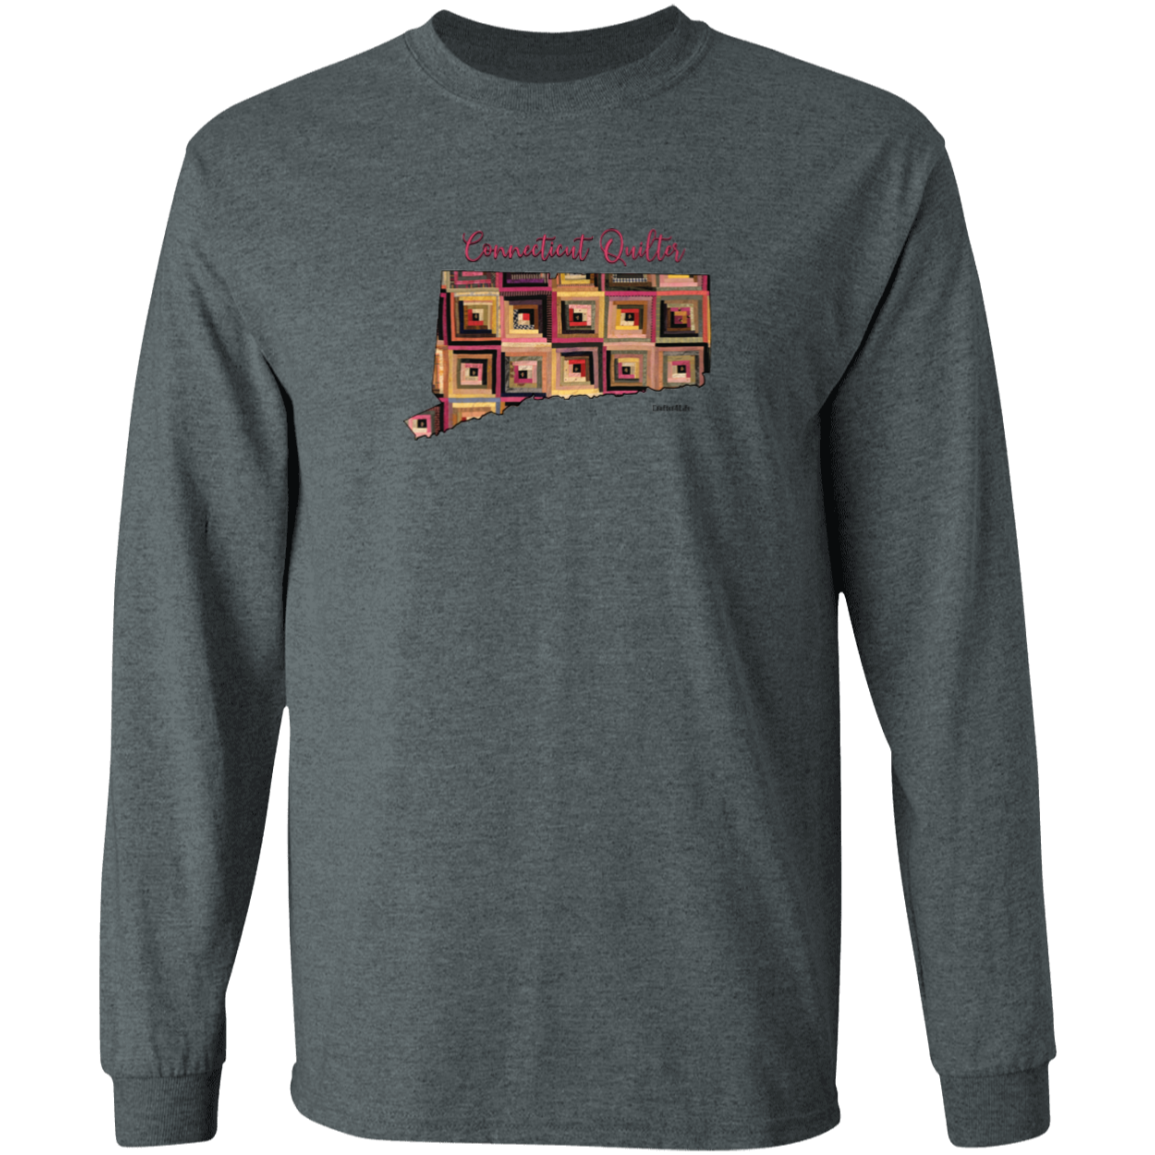 Connecticut Quilter Long Sleeve T-Shirt, Gift for Quilting Friends and Family